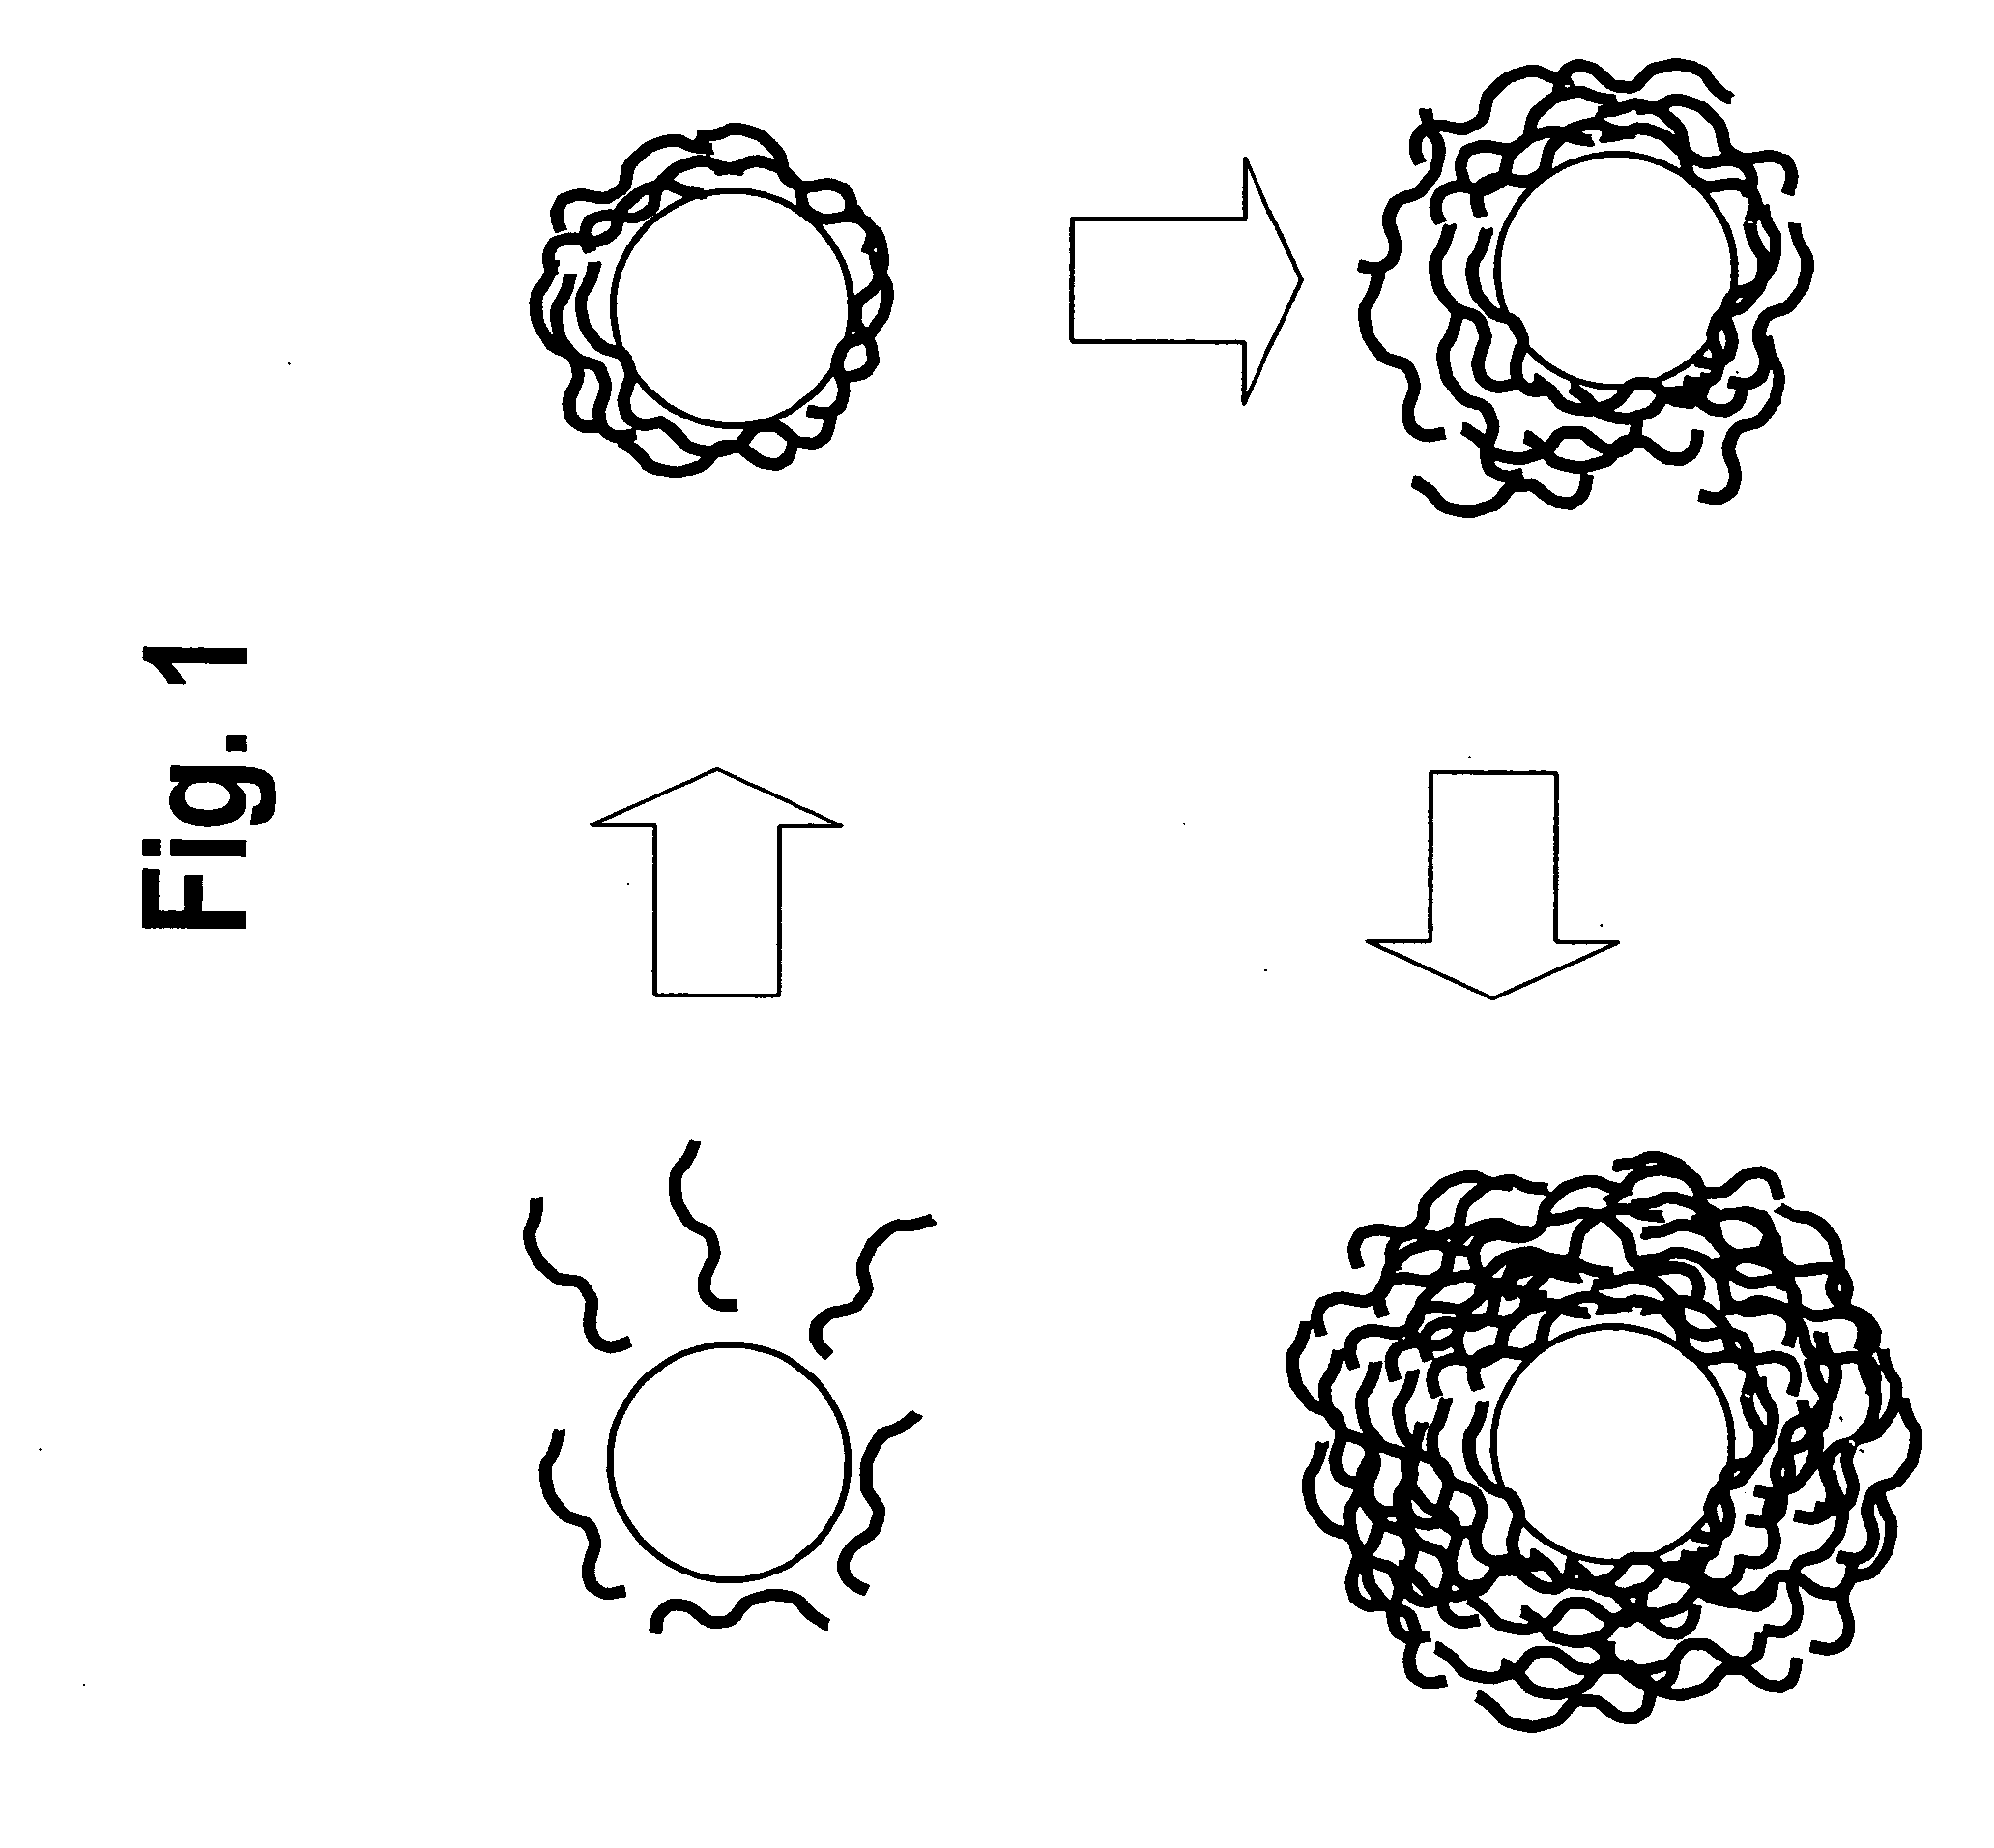 Nanoparticle based inks and methods of making the same